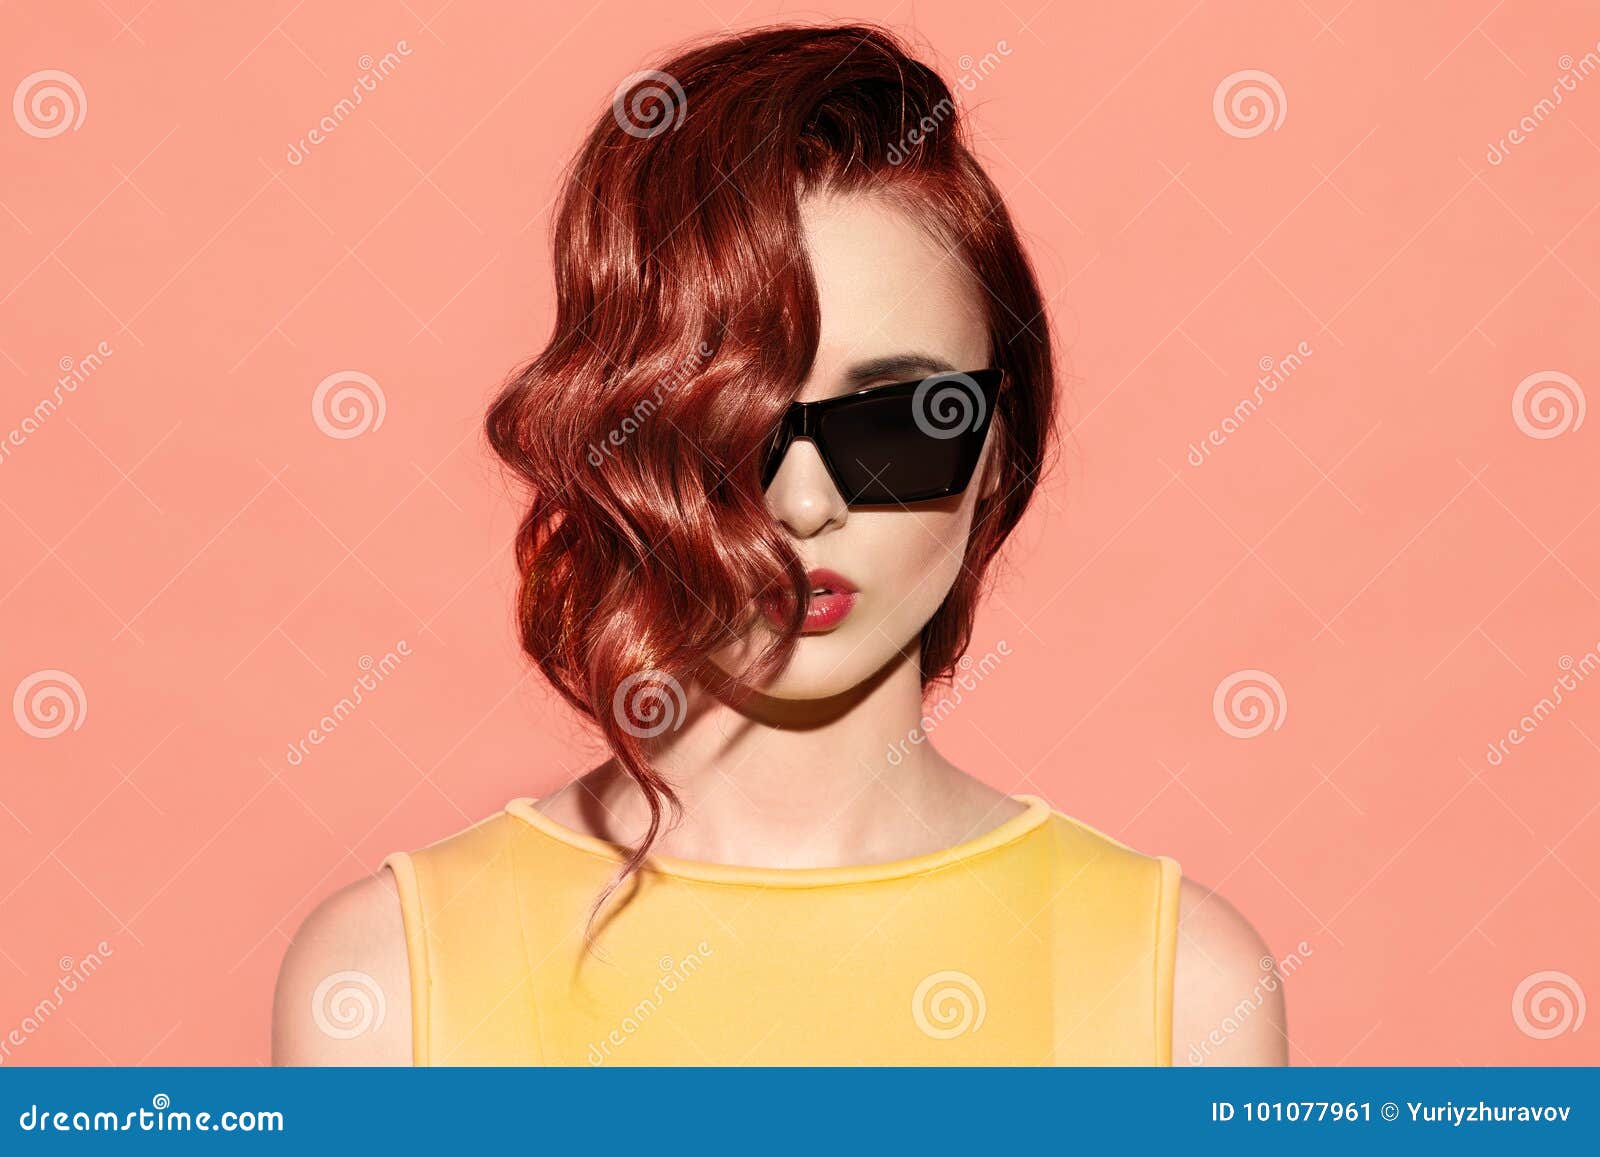 Close Up Portrait Of Stylish Ginger Woman In Sunglasses Stock Image 